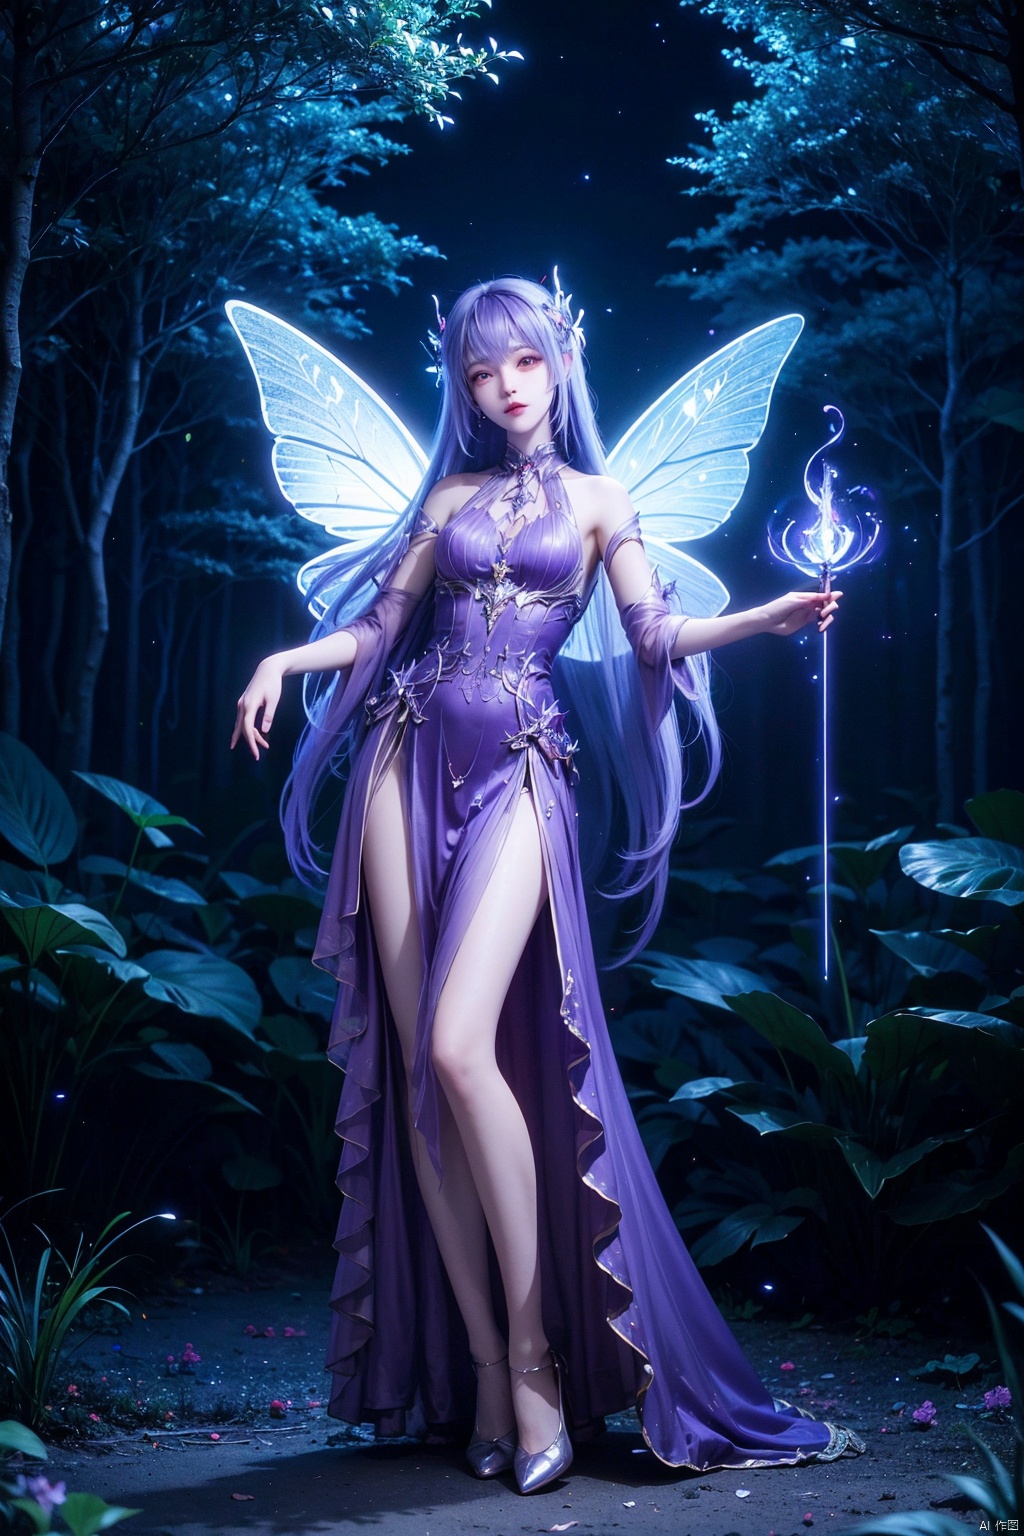  ((4k,masterpiece,best quality)), professional camera, 8k photos, wallpaper 1 girl, solo,purple hair,ethereal fairy, floating on clouds, sparkling gown with iridescent butterfly wings, holding a magic wand, surrounded by dancing fireflies, twilight sky, full moon, mystical forest in the background, glowing mushrooms, enchanted flowers, softly illuminated by bioluminescence, serene expression, delicate features with pointed ears, flowing silver hair adorned with tiny stars, gentle breeze causing her dress and hair to flow ethereally, dreamlike atmosphere, surreal color palette, high dynamic range lighting, intricate details, otherworldly aesthetic.
, hand,Stay away from the camera, take a full body photo,